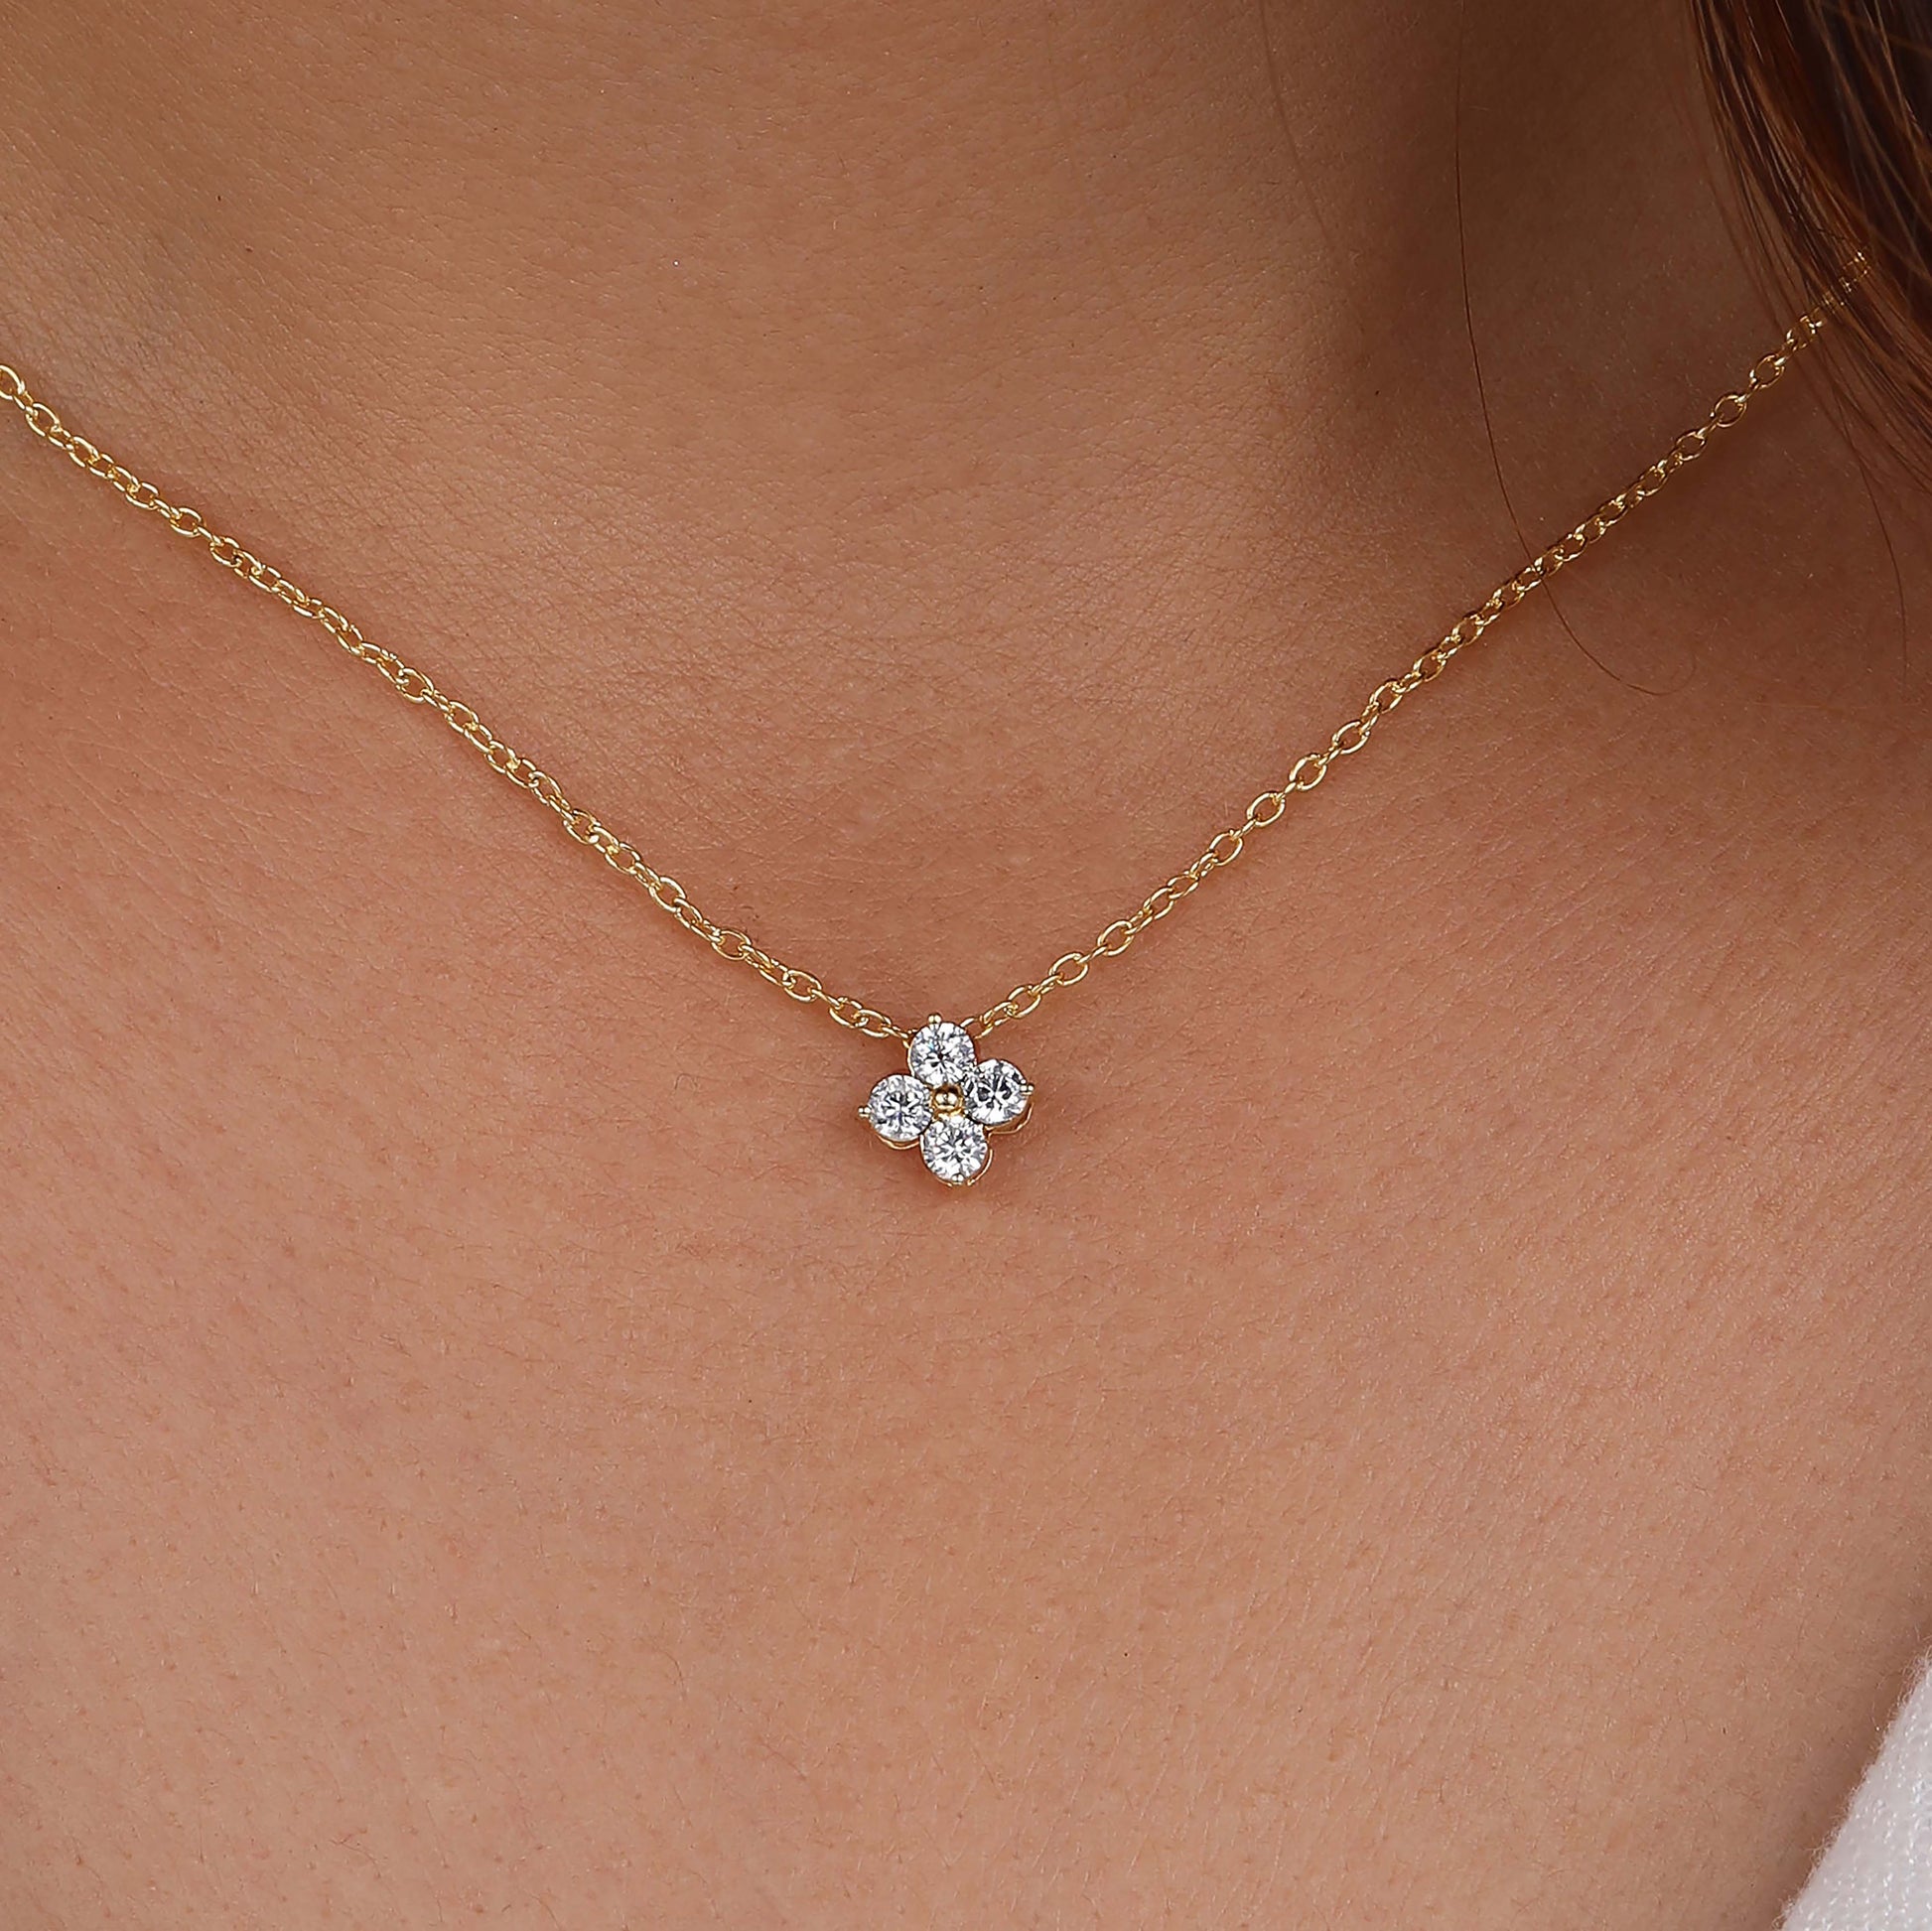 she is wearing moissanite diamond necklace